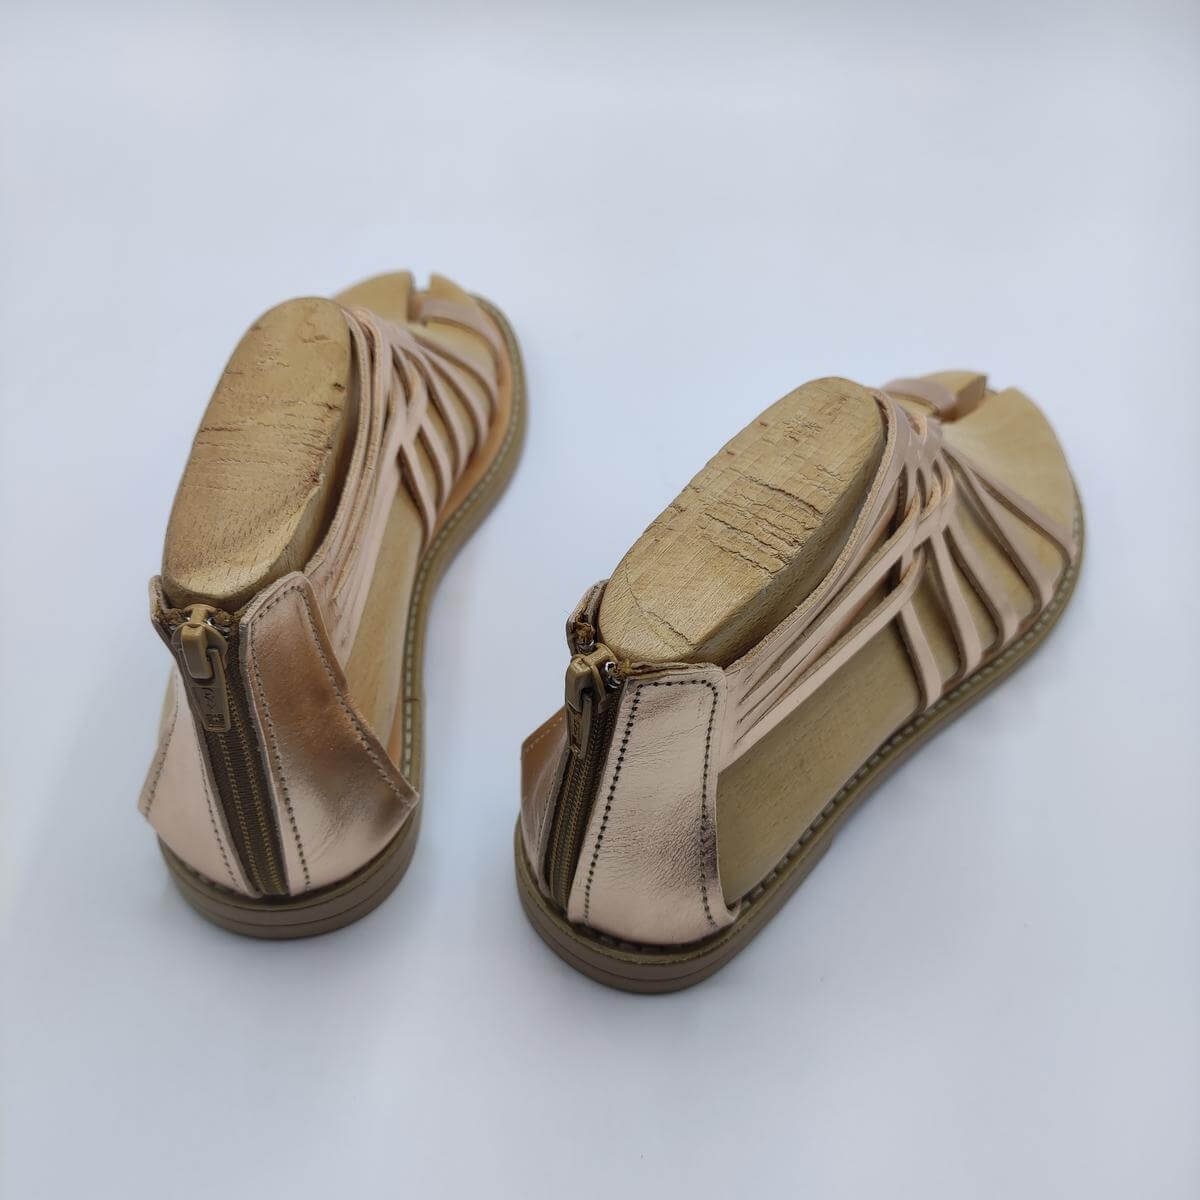 sandals with zipper in back rose gold